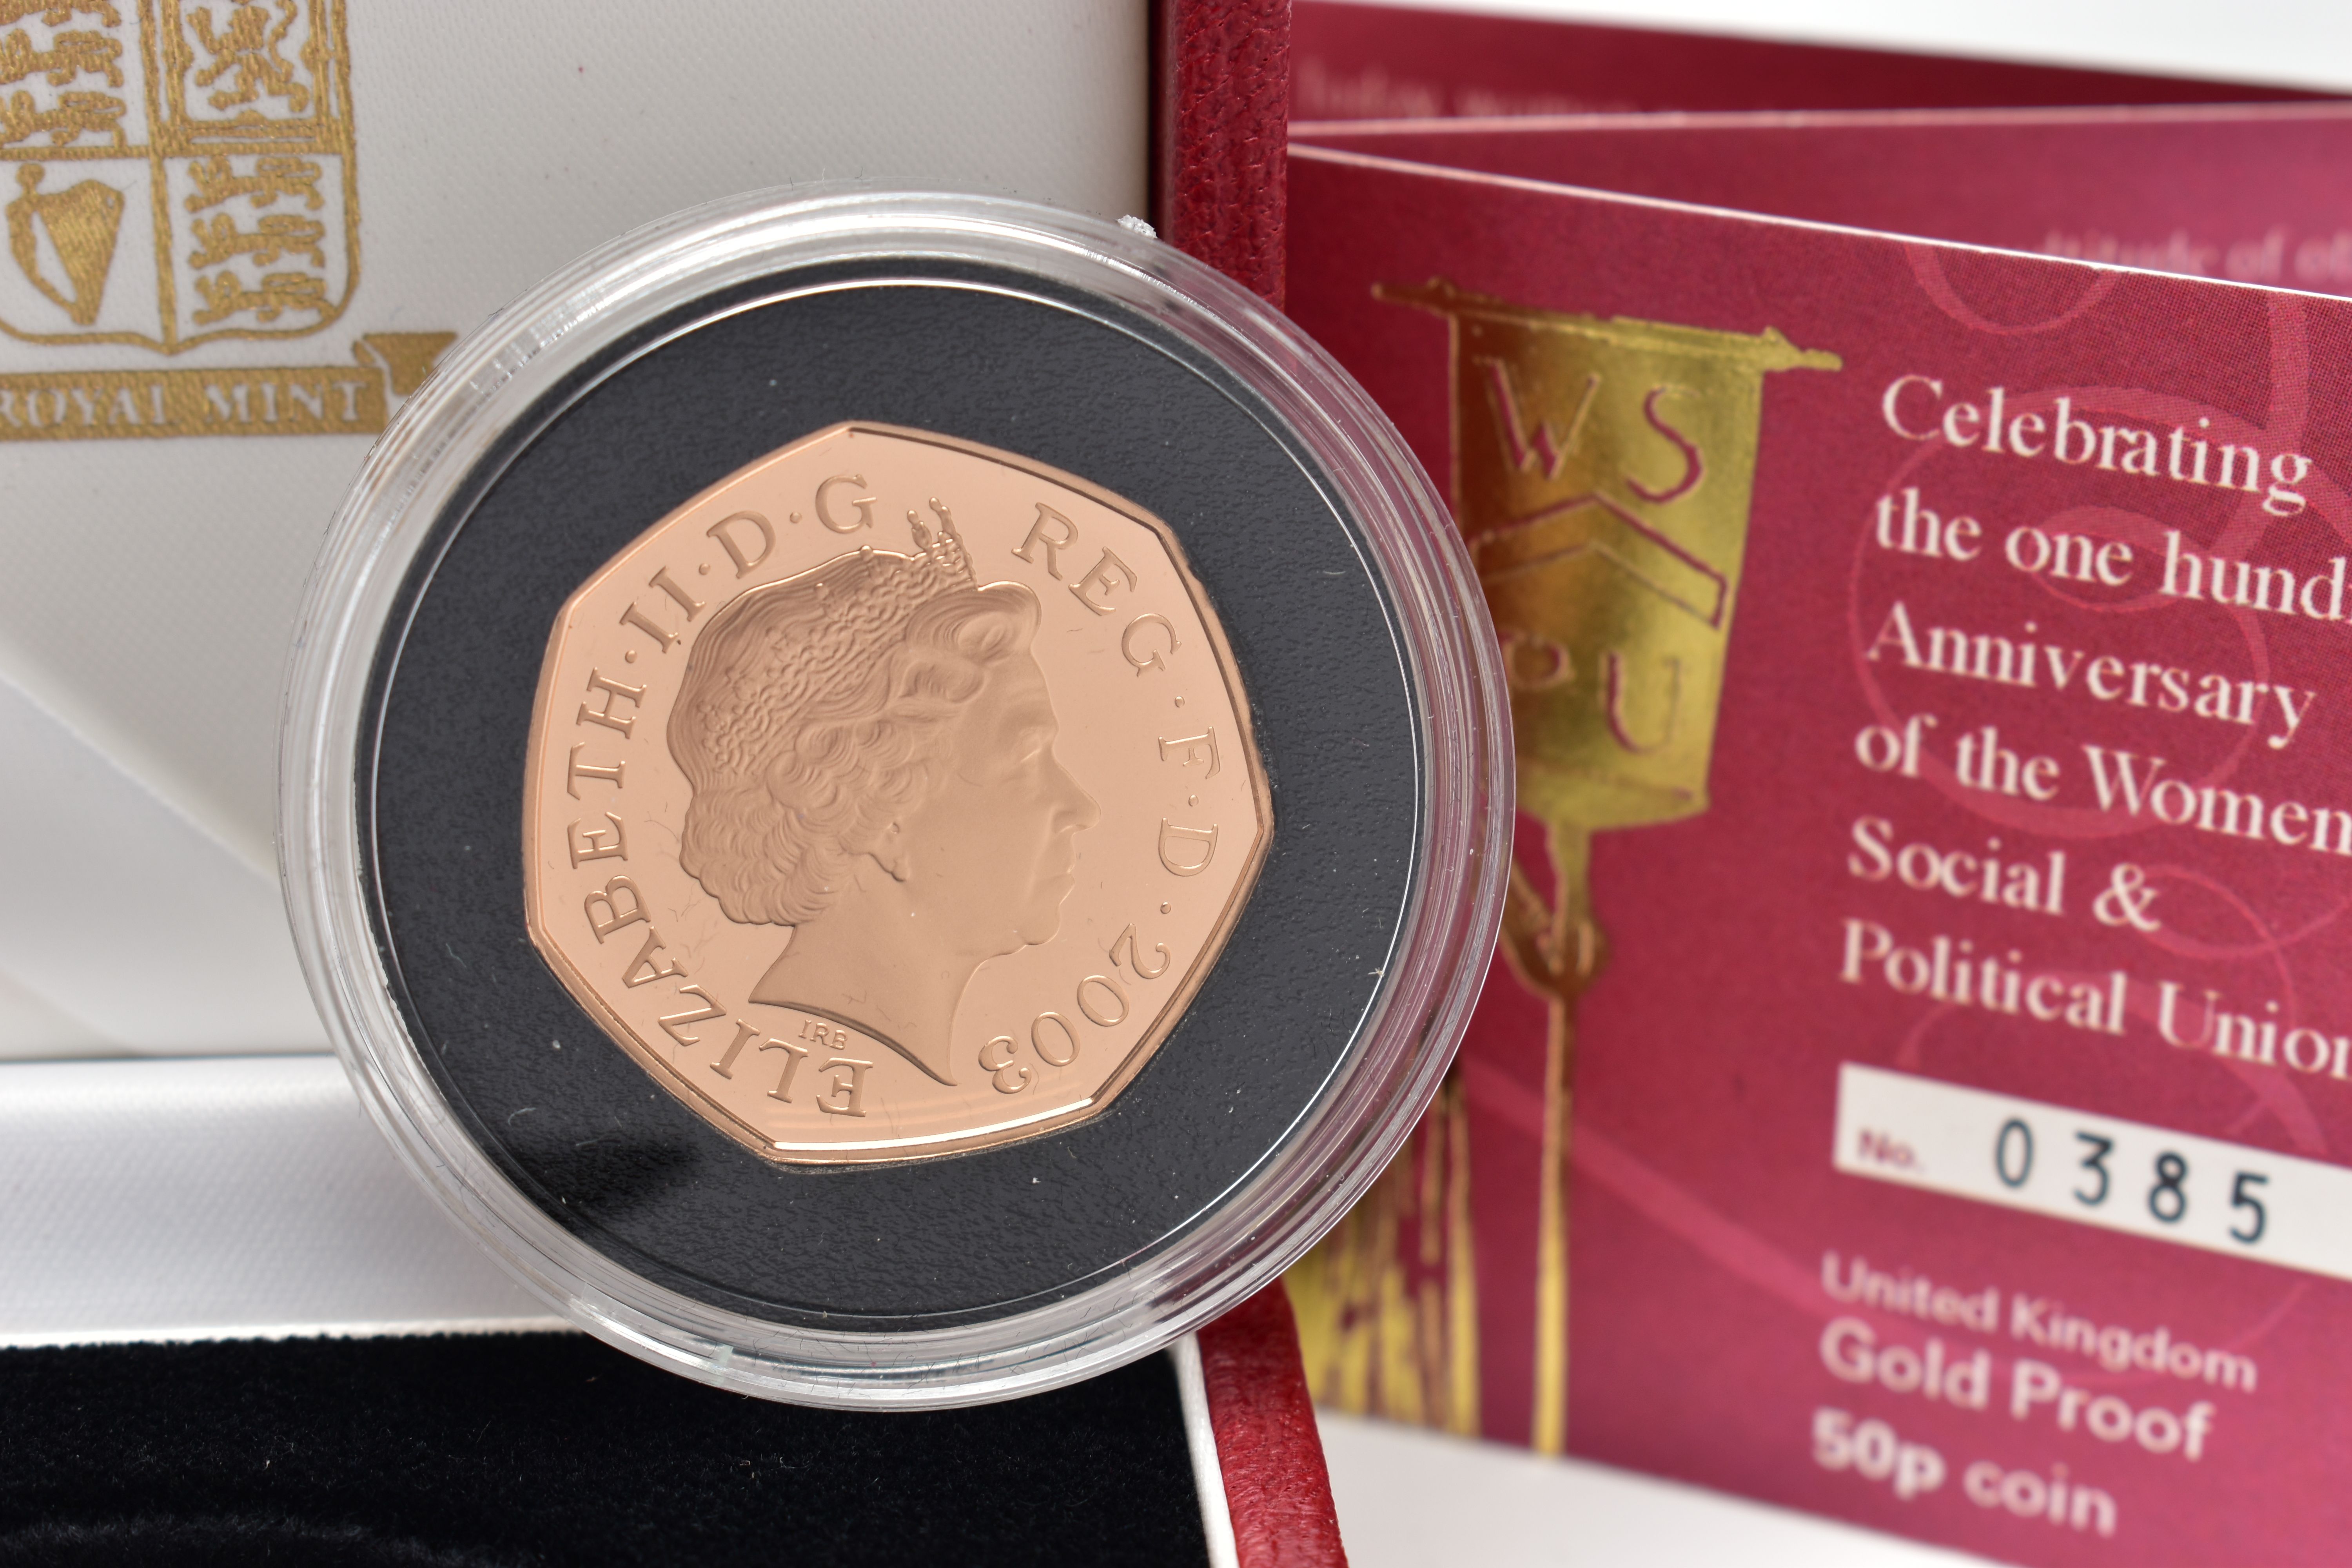 A ROYAL MINT 2003 GOLD PROOF 50P COIN, celebrating the one hundredth anniversary of the Womens - Image 2 of 2